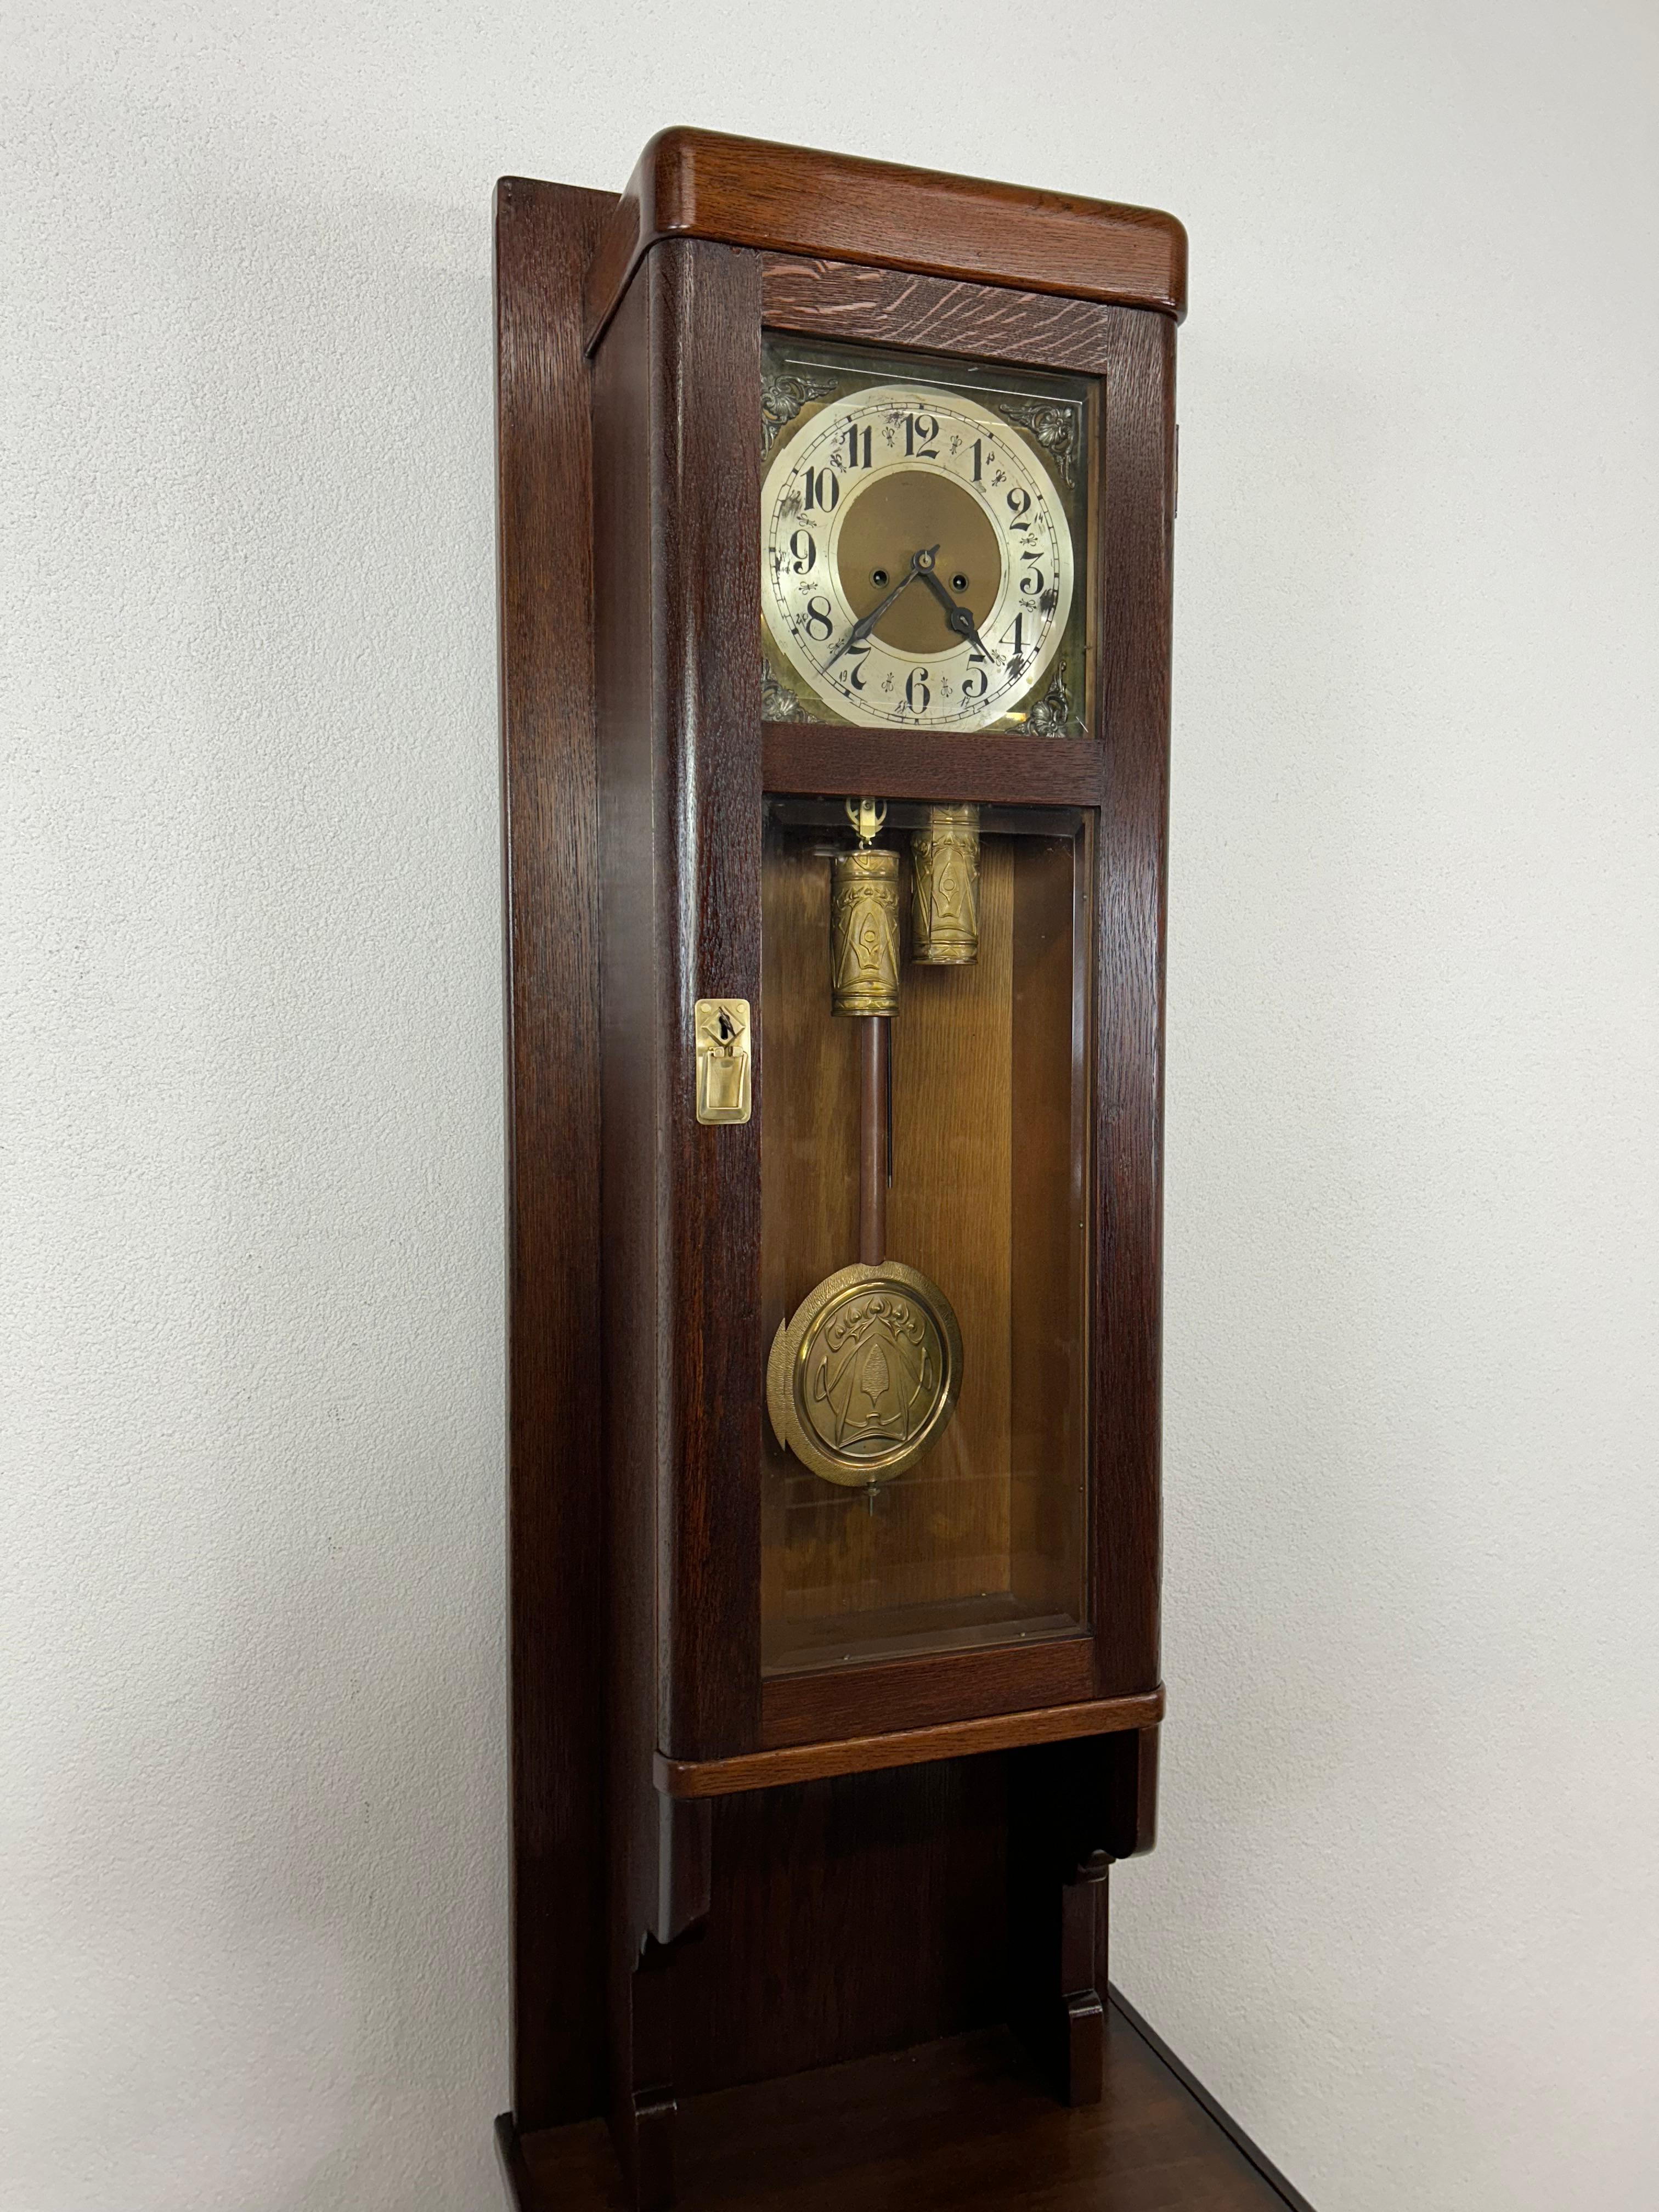 Floor clock in style of Vienna secession. Professionally stained and repolished.